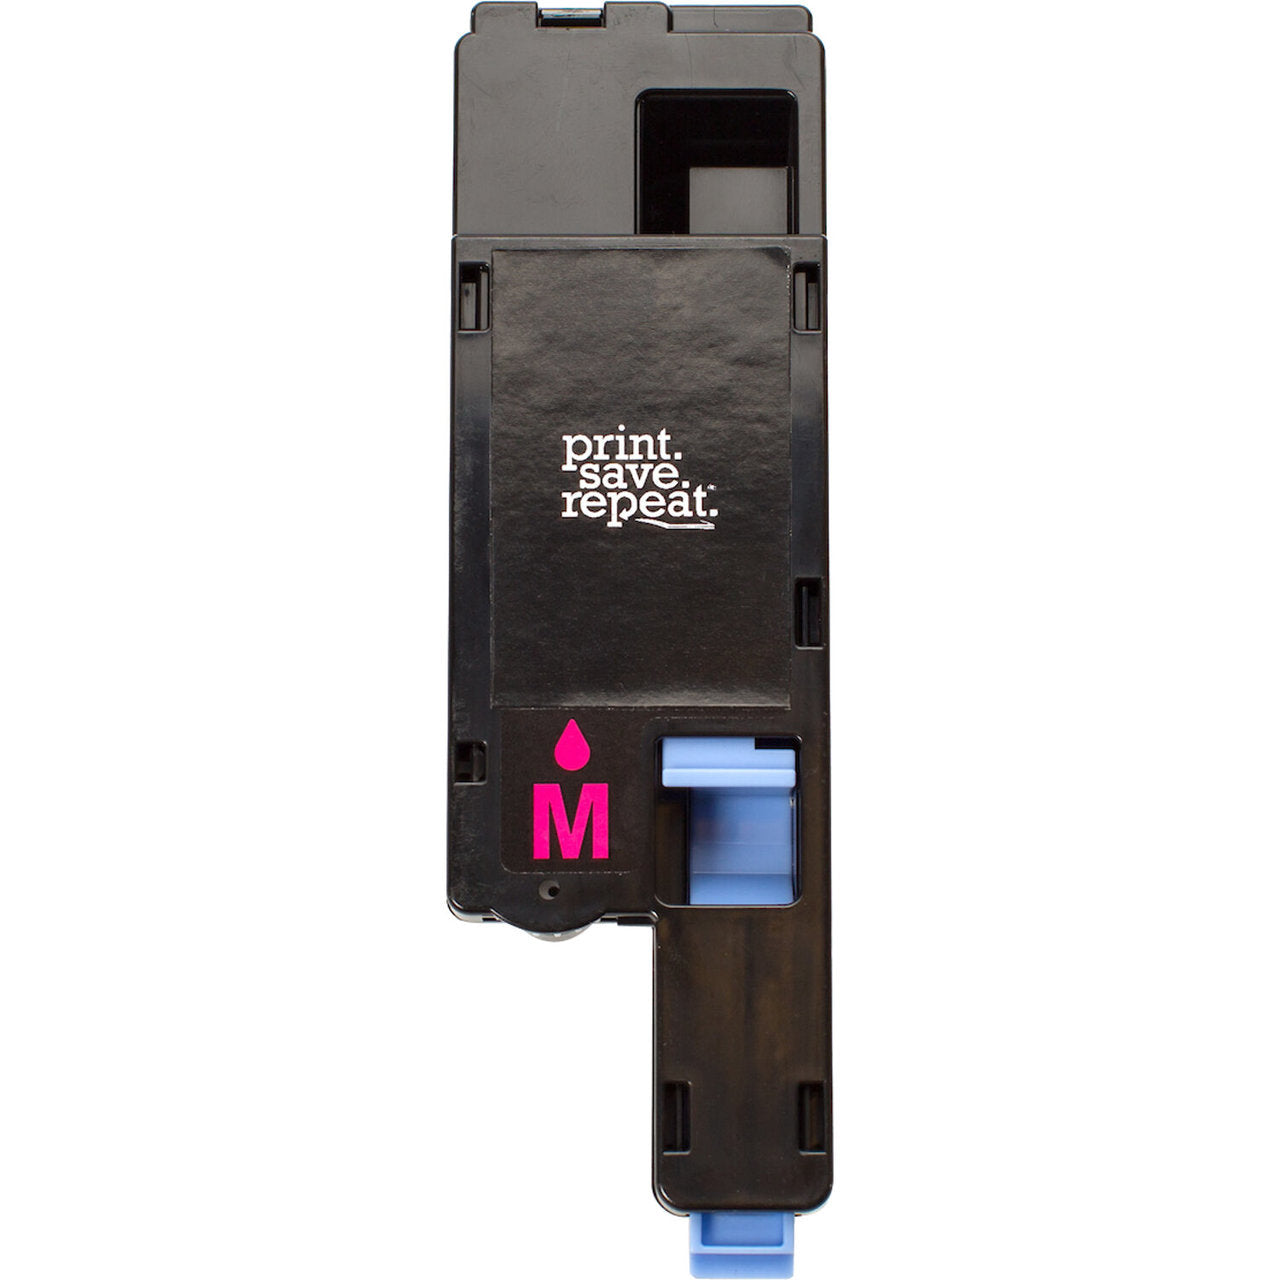 Print.Save.Repeat. Dell MHT79 Magenta Remanufactured Toner Cartridge for 1250, 1350, 1355, C1760, C1765 [700 Pages]